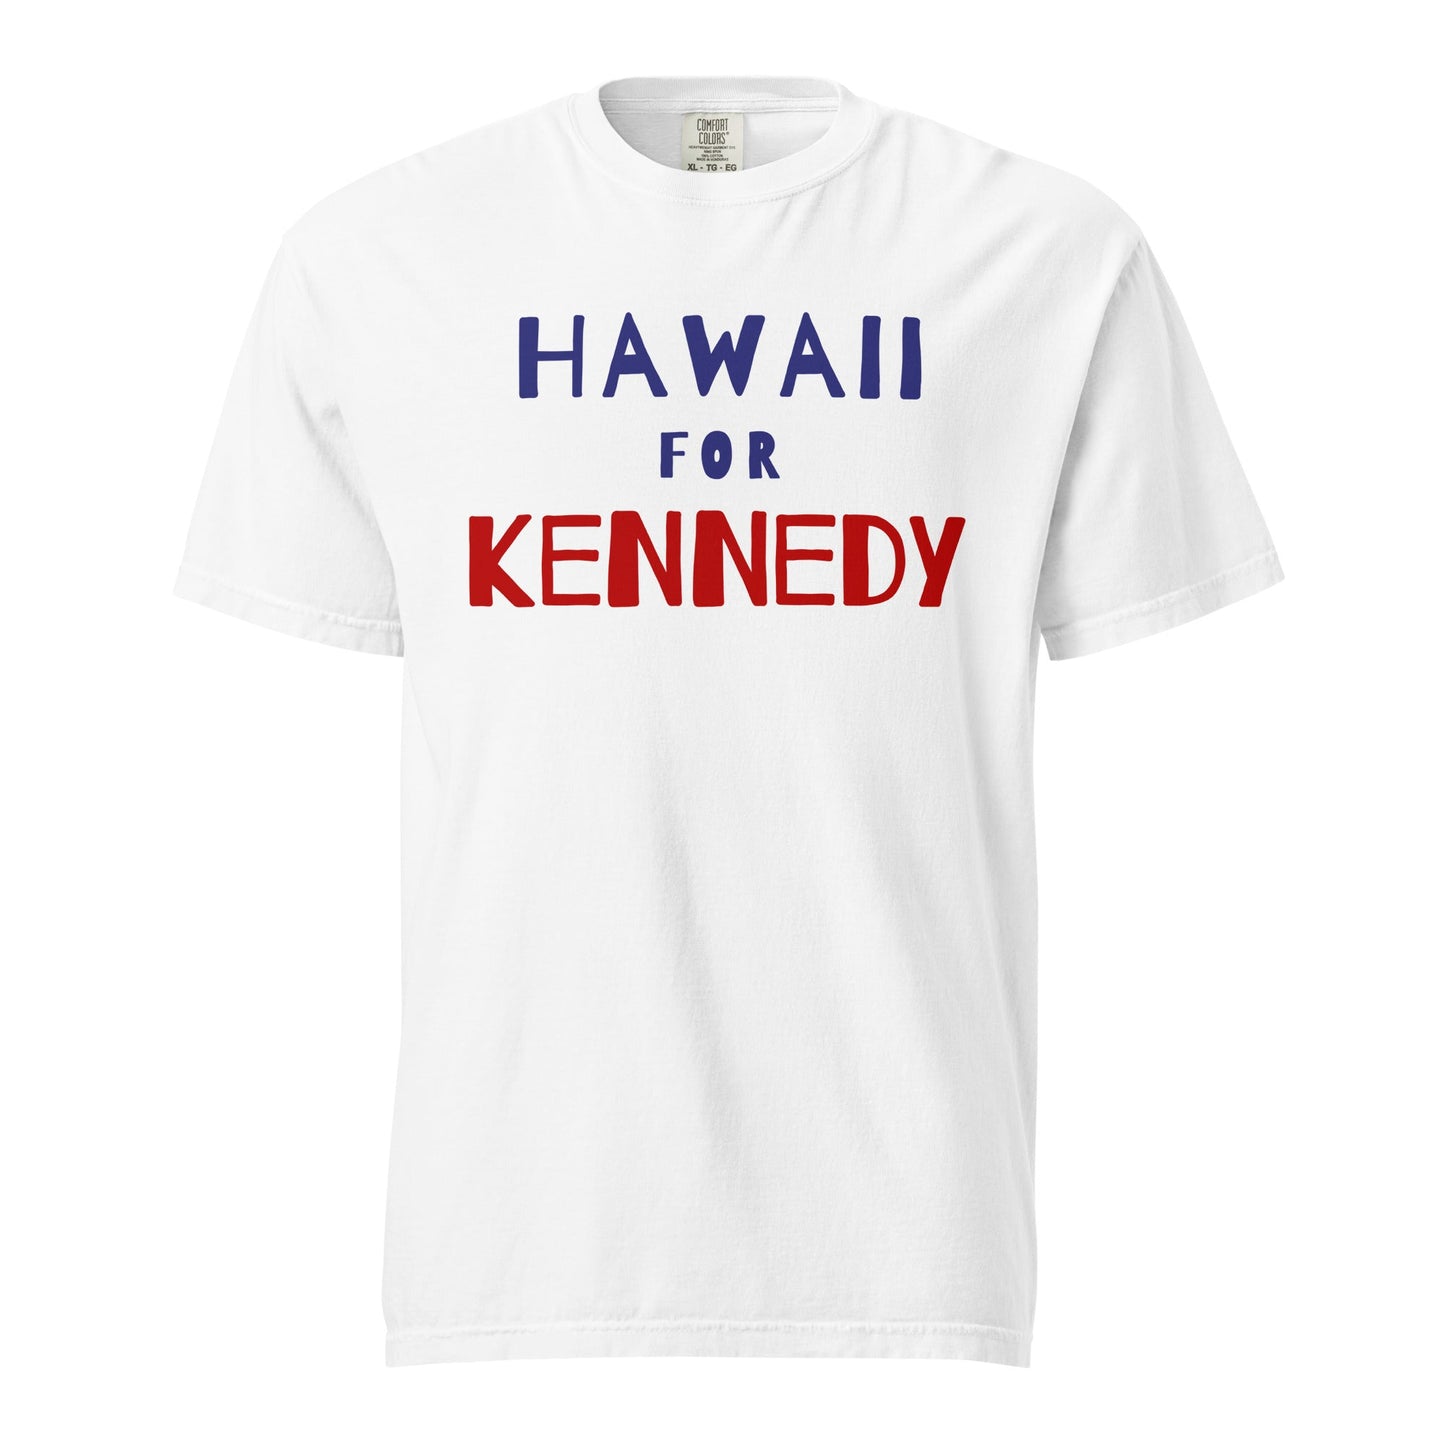 Hawaii for Kennedy Unisex Heavyweight Tee - TEAM KENNEDY. All rights reserved